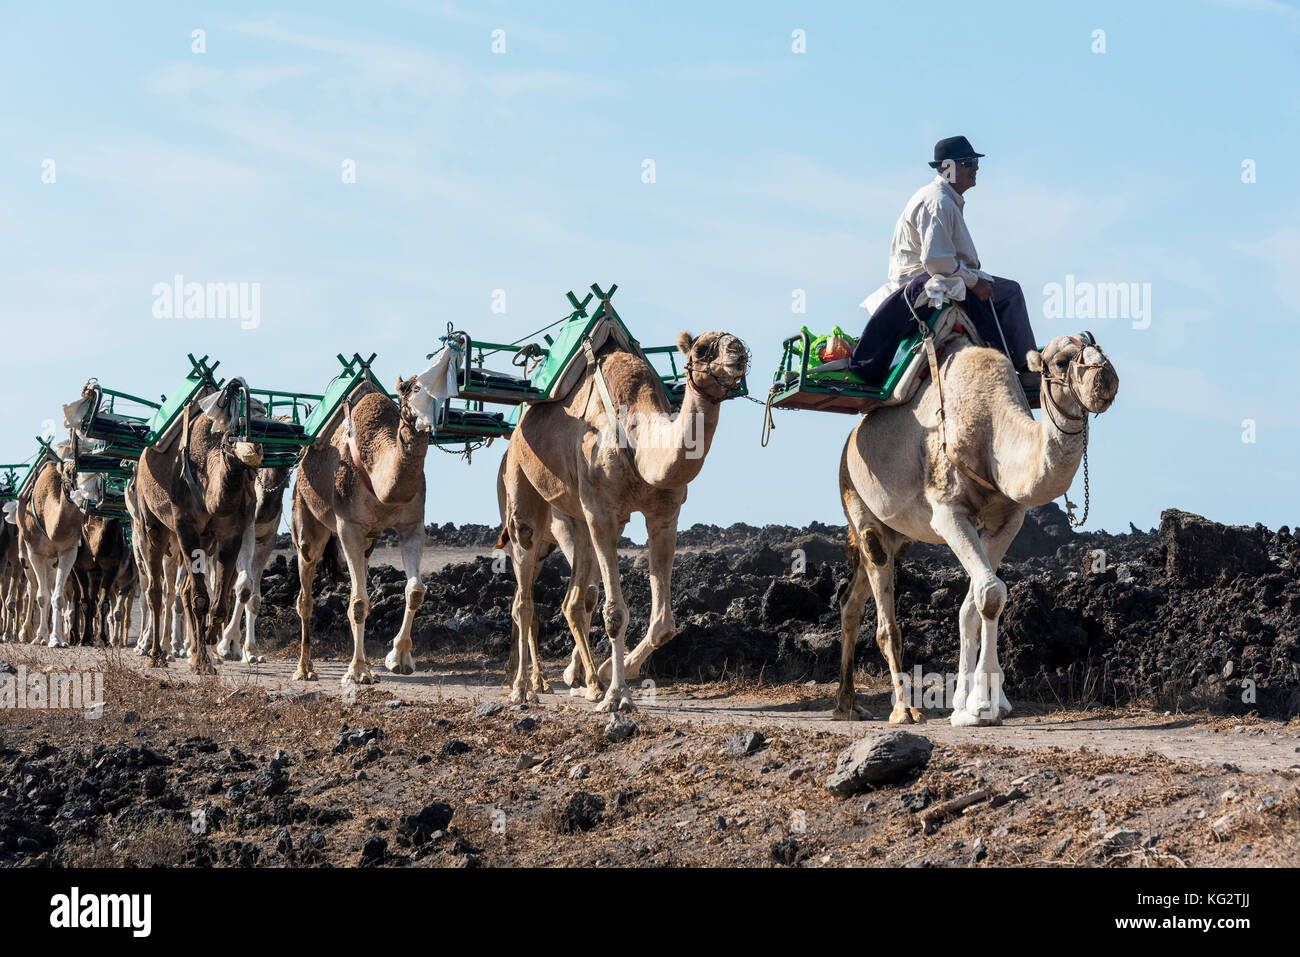 Camels returning from ther day's work transporting passengers round the volcanic Timanfaya National Park in Lanzarote, Canary silands. Stock Photo